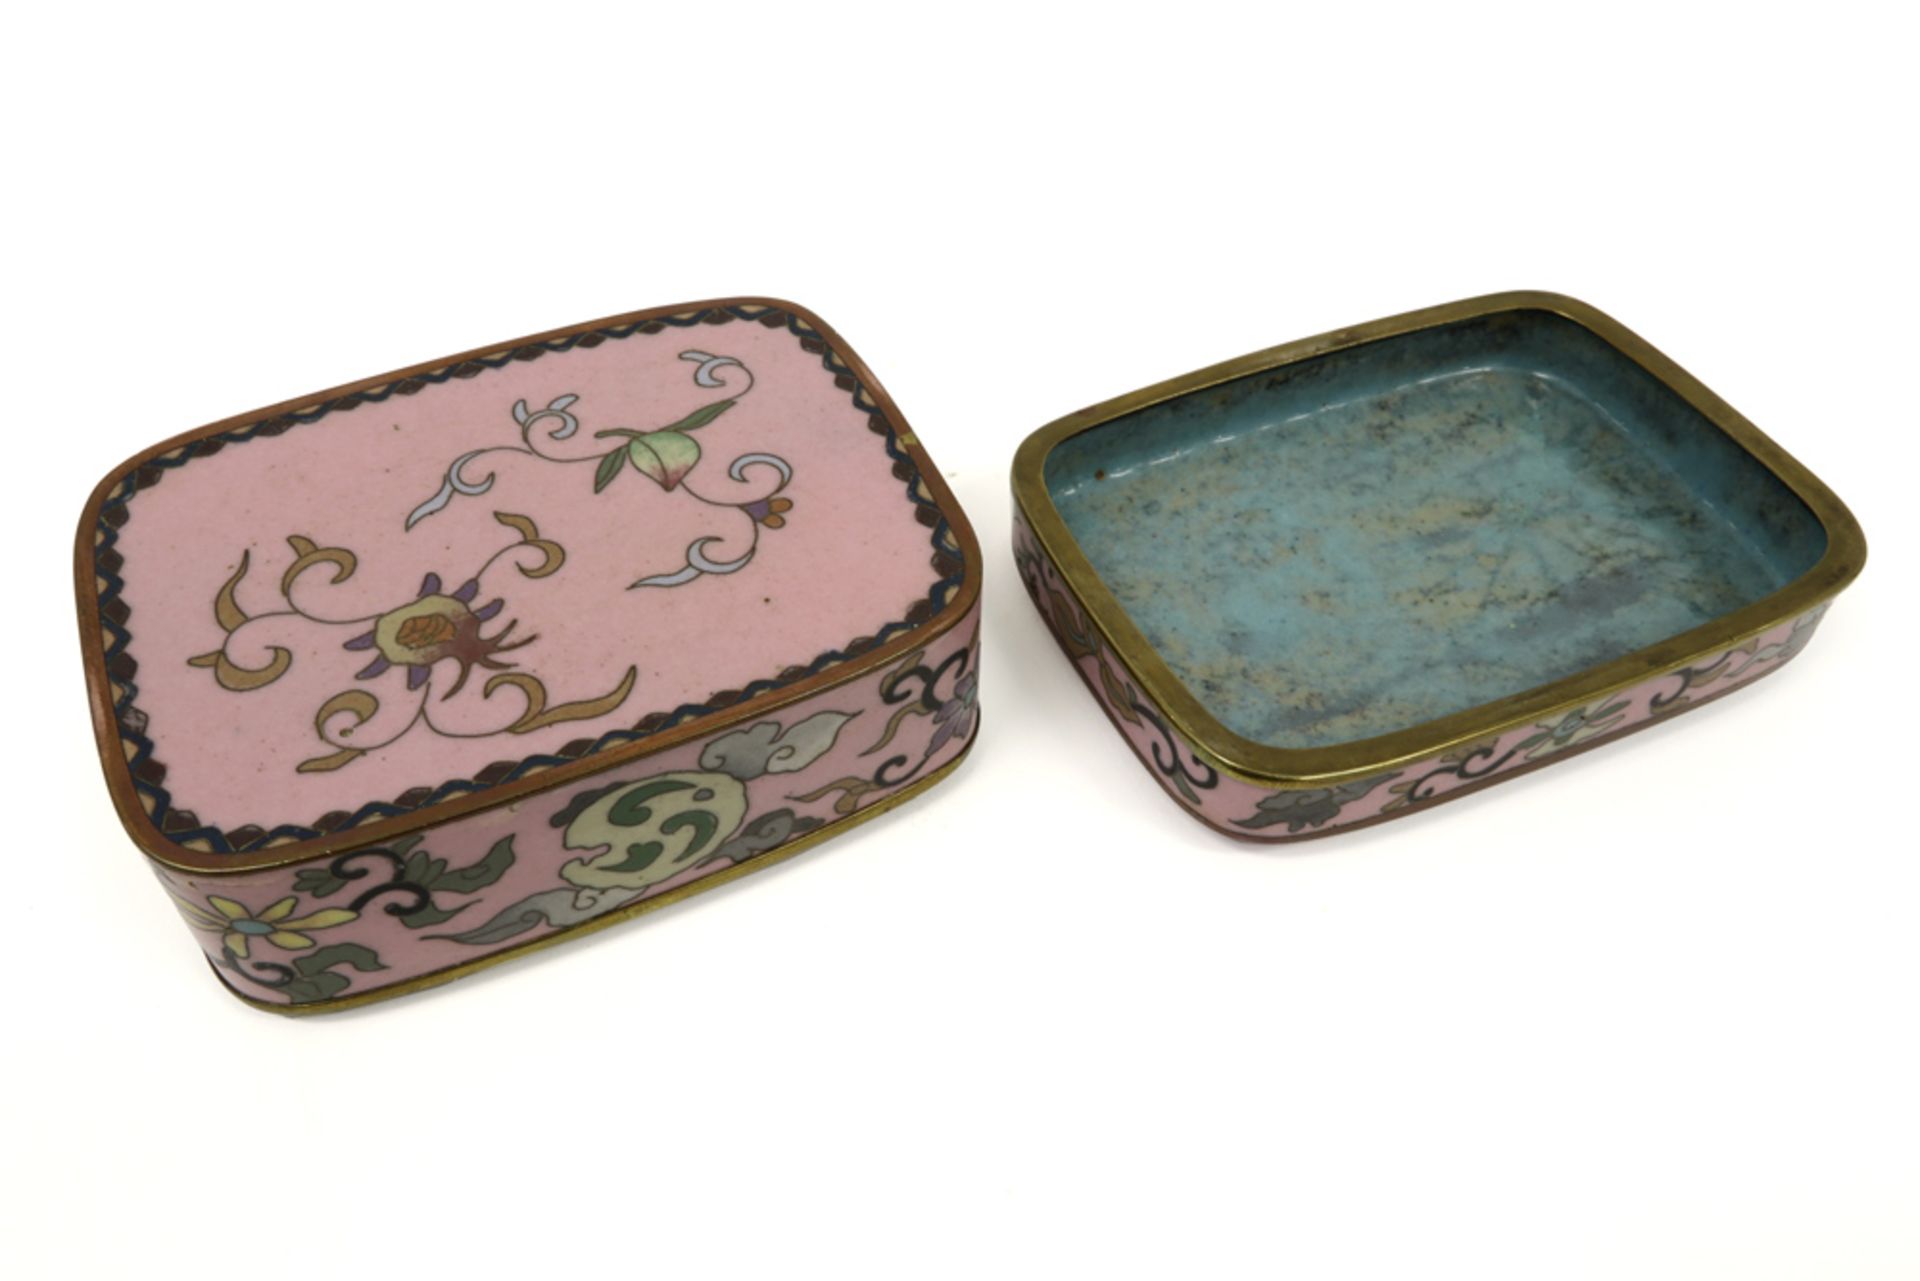 19th Cent. Chinese Qing period box in cloisonné with a polychrome birds and flowers decor || - Image 3 of 4